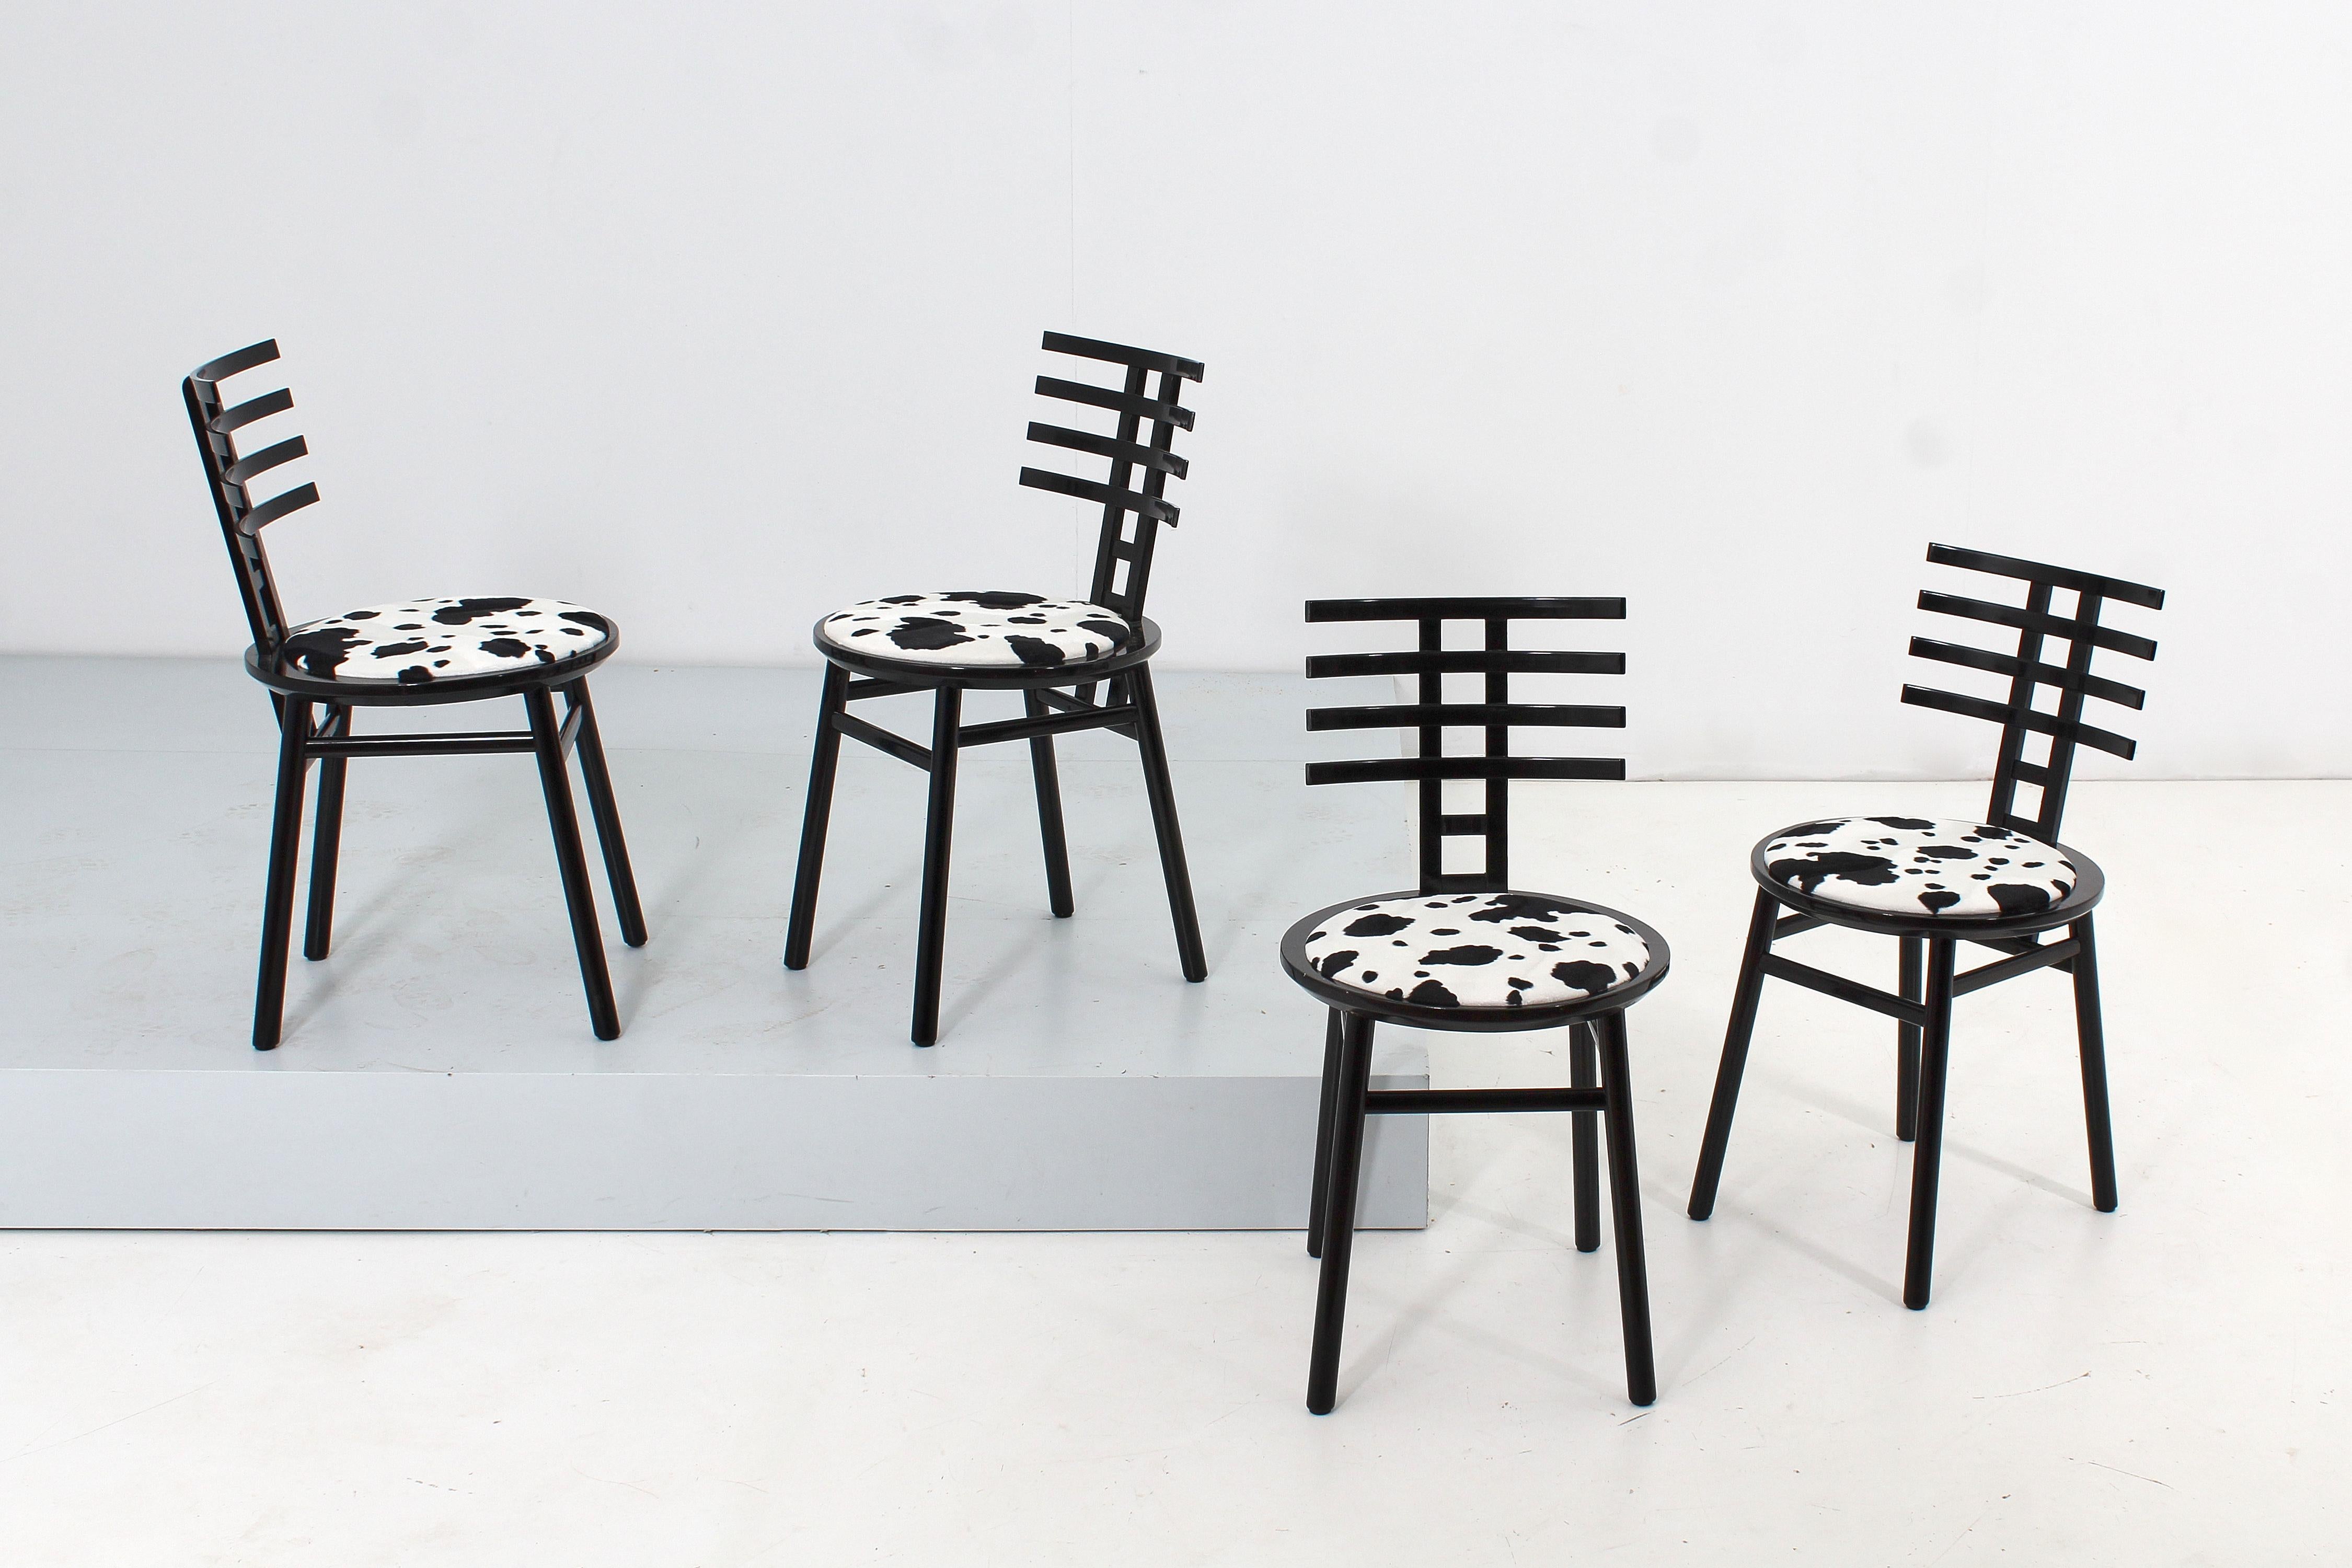 Original and elegant set of four chairs designed by De Pas, D'Urbino, Lomazzi, belonging to the collection called 